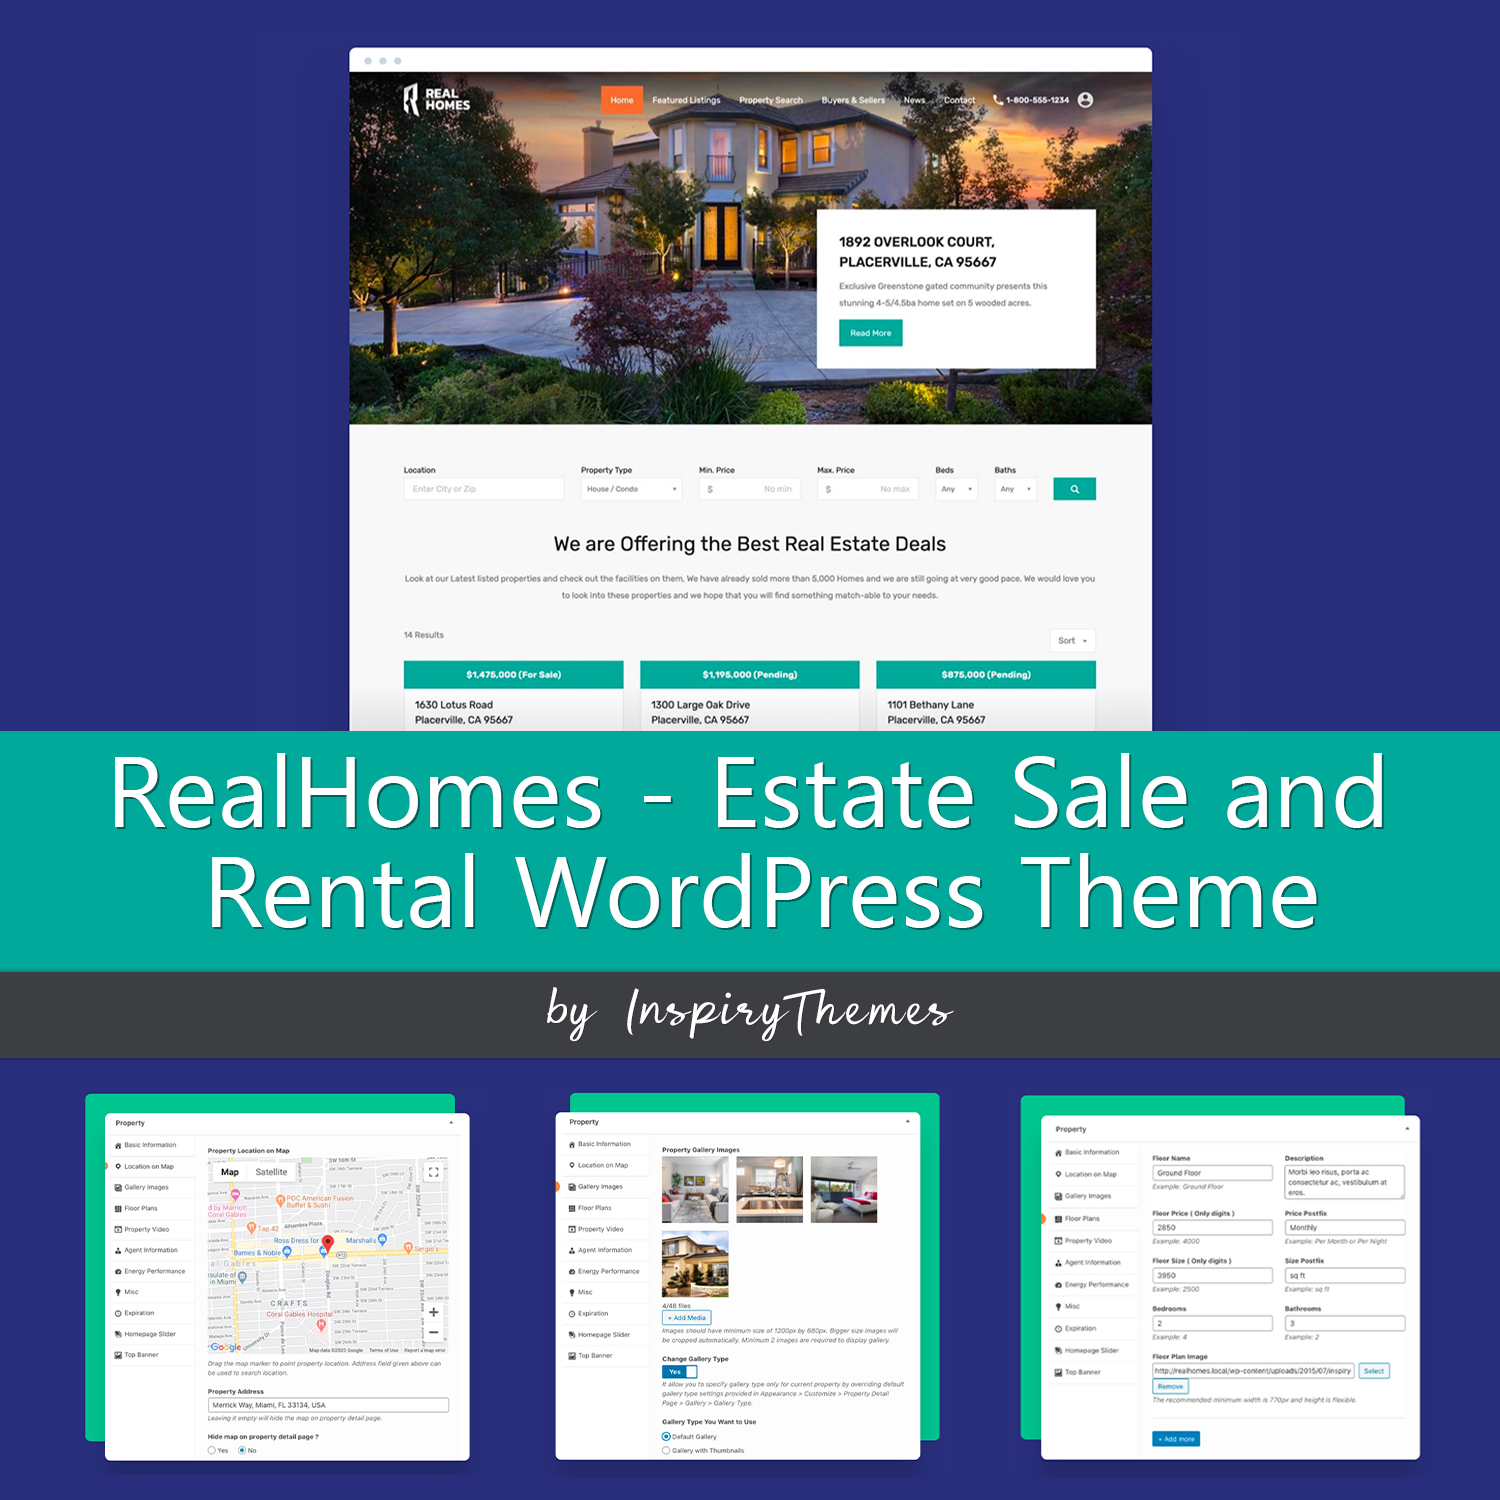 Preview realhomes estate sale and rental wordpress theme.